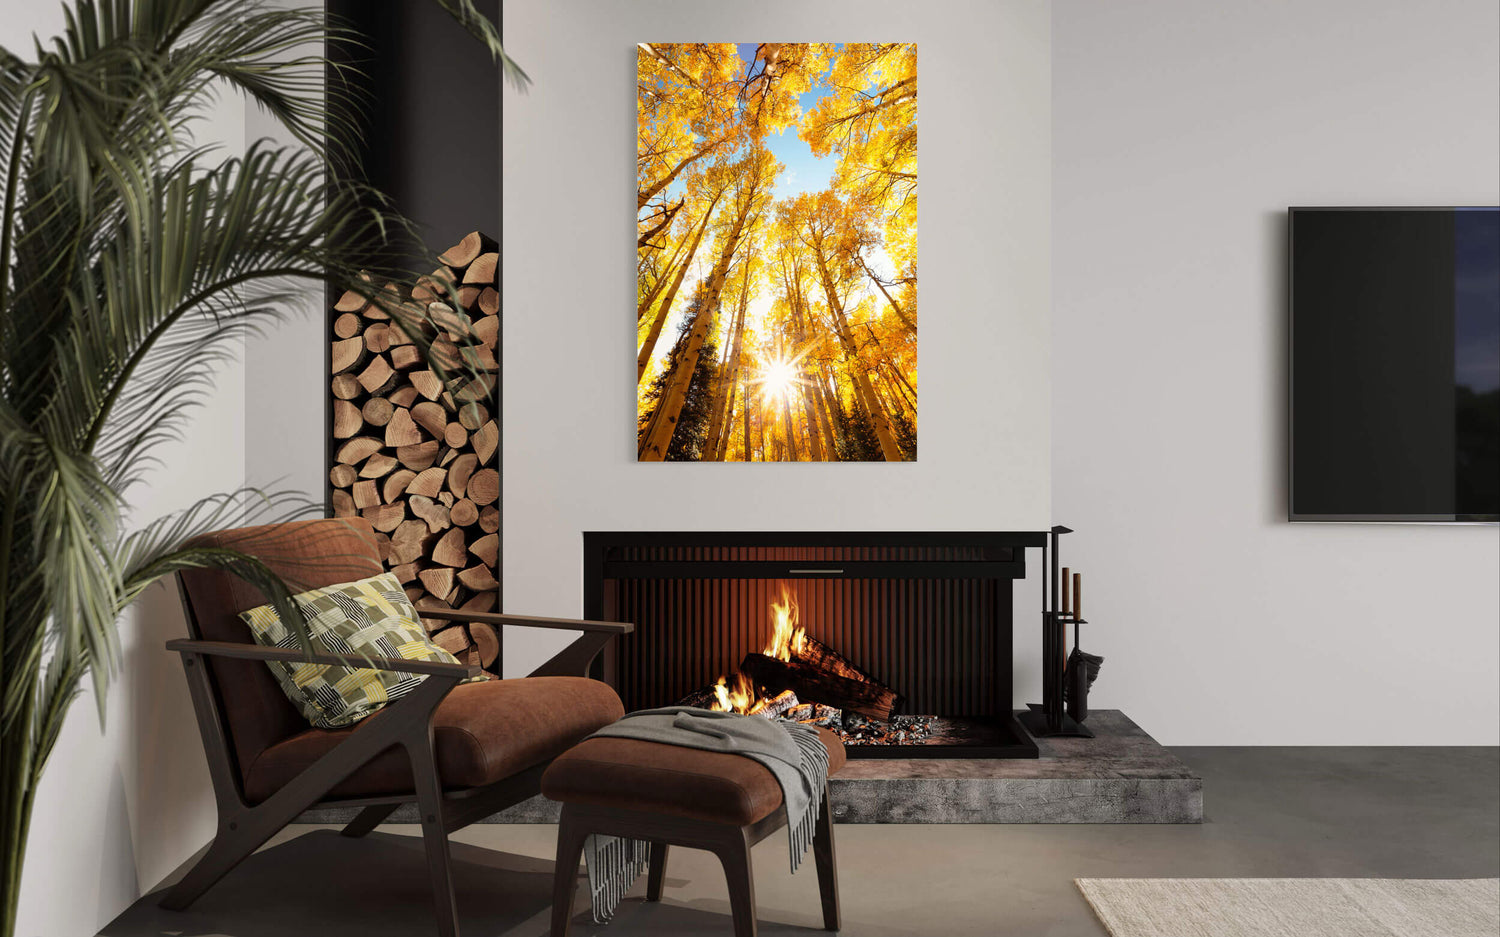 A Kebler Pass picture showing the Crested Butte fall colors hangs in a living room.